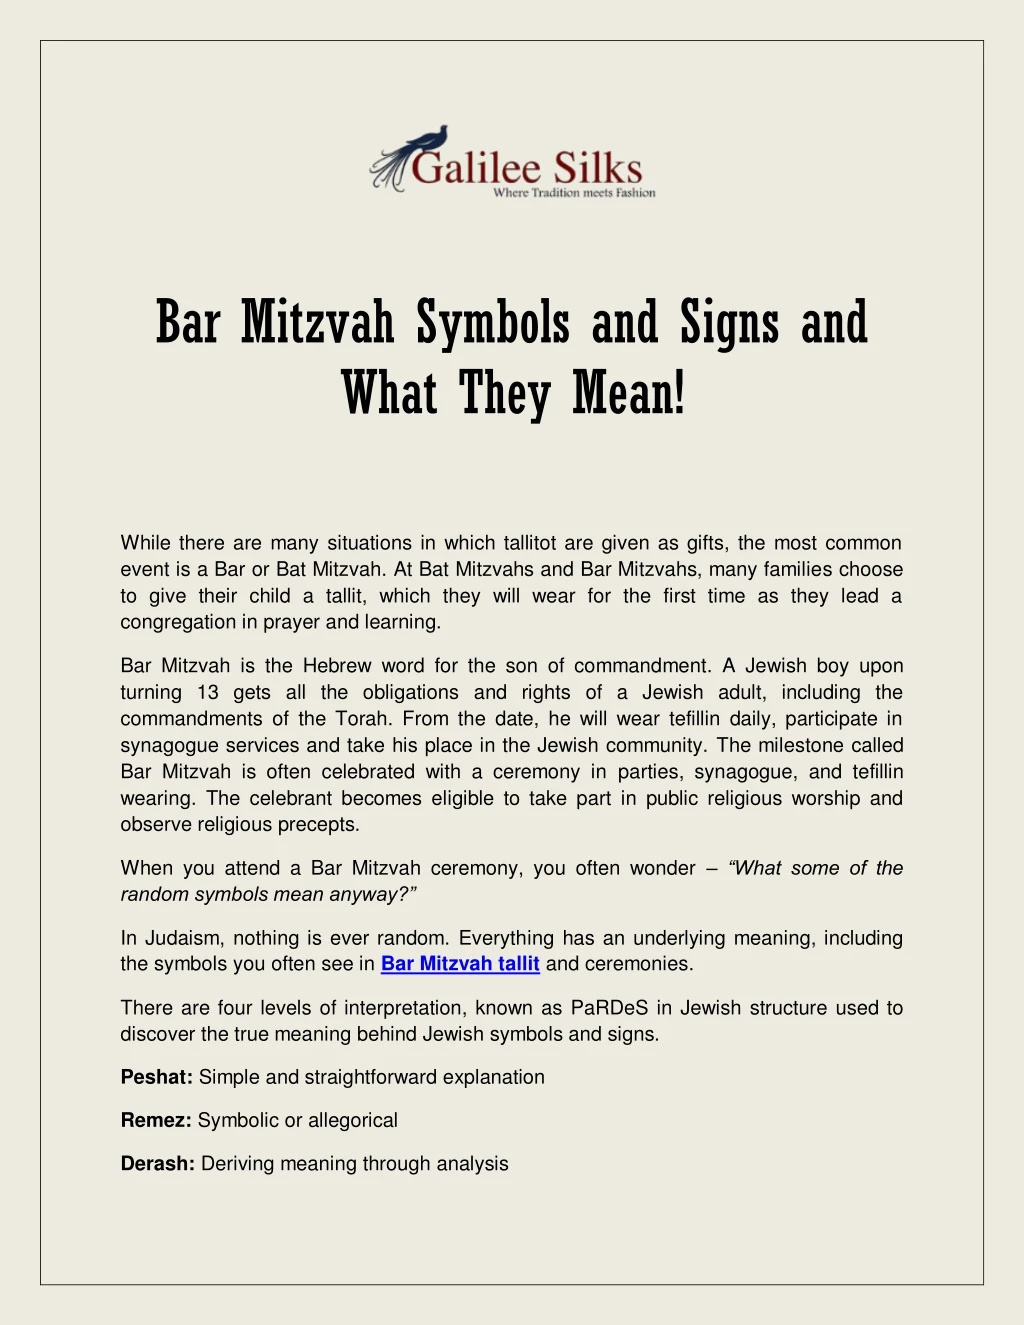 bar mitzvah symbols and signs and what they mean